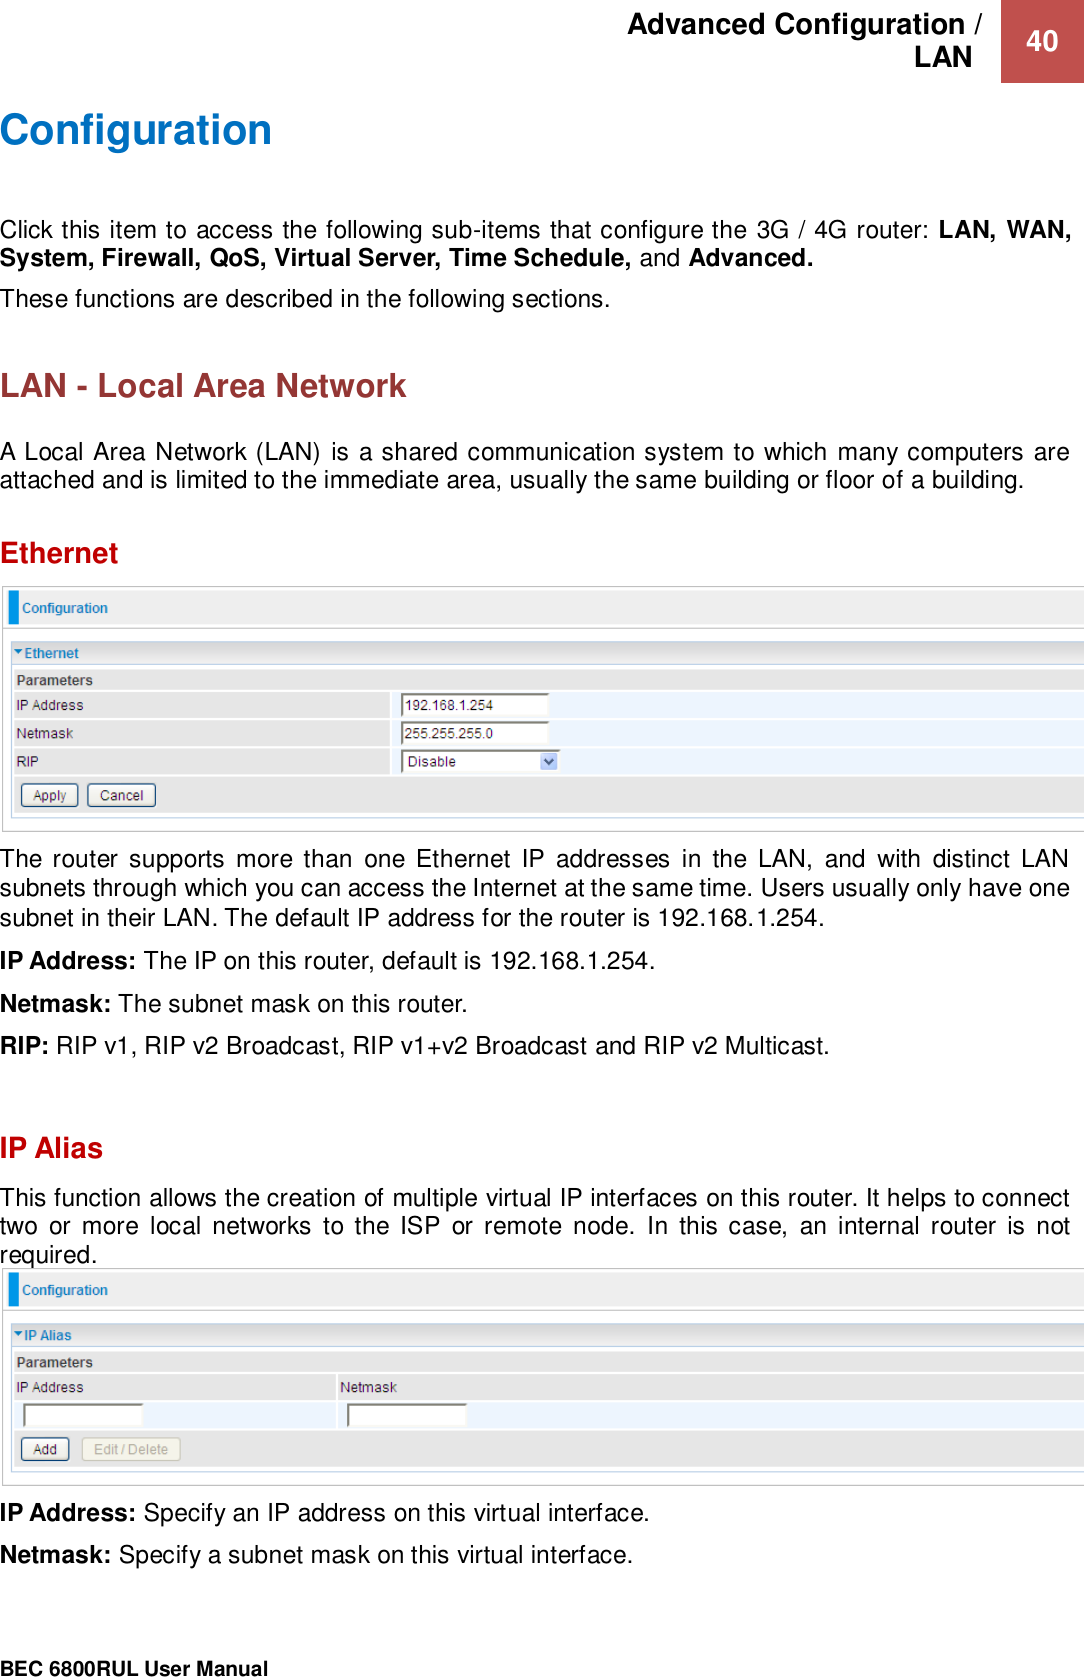 Advanced Configuration /  LAN   40                                                 BEC 6800RUL User Manual  Configuration  Click this item to access the following sub-items that configure the 3G / 4G router: LAN, WAN, System, Firewall, QoS, Virtual Server, Time Schedule, and Advanced. These functions are described in the following sections.  LAN - Local Area Network  A Local Area Network (LAN) is a shared communication system to which many computers are attached and is limited to the immediate area, usually the same building or floor of a building.  Ethernet  The router supports  more than  one Ethernet  IP  addresses  in  the  LAN,  and  with  distinct  LAN subnets through which you can access the Internet at the same time. Users usually only have one subnet in their LAN. The default IP address for the router is 192.168.1.254.  IP Address: The IP on this router, default is 192.168.1.254.  Netmask: The subnet mask on this router. RIP: RIP v1, RIP v2 Broadcast, RIP v1+v2 Broadcast and RIP v2 Multicast.   IP Alias This function allows the creation of multiple virtual IP interfaces on this router. It helps to connect two  or more  local  networks  to the  ISP  or  remote  node.  In this  case,  an internal  router  is  not required.  IP Address: Specify an IP address on this virtual interface. Netmask: Specify a subnet mask on this virtual interface. 